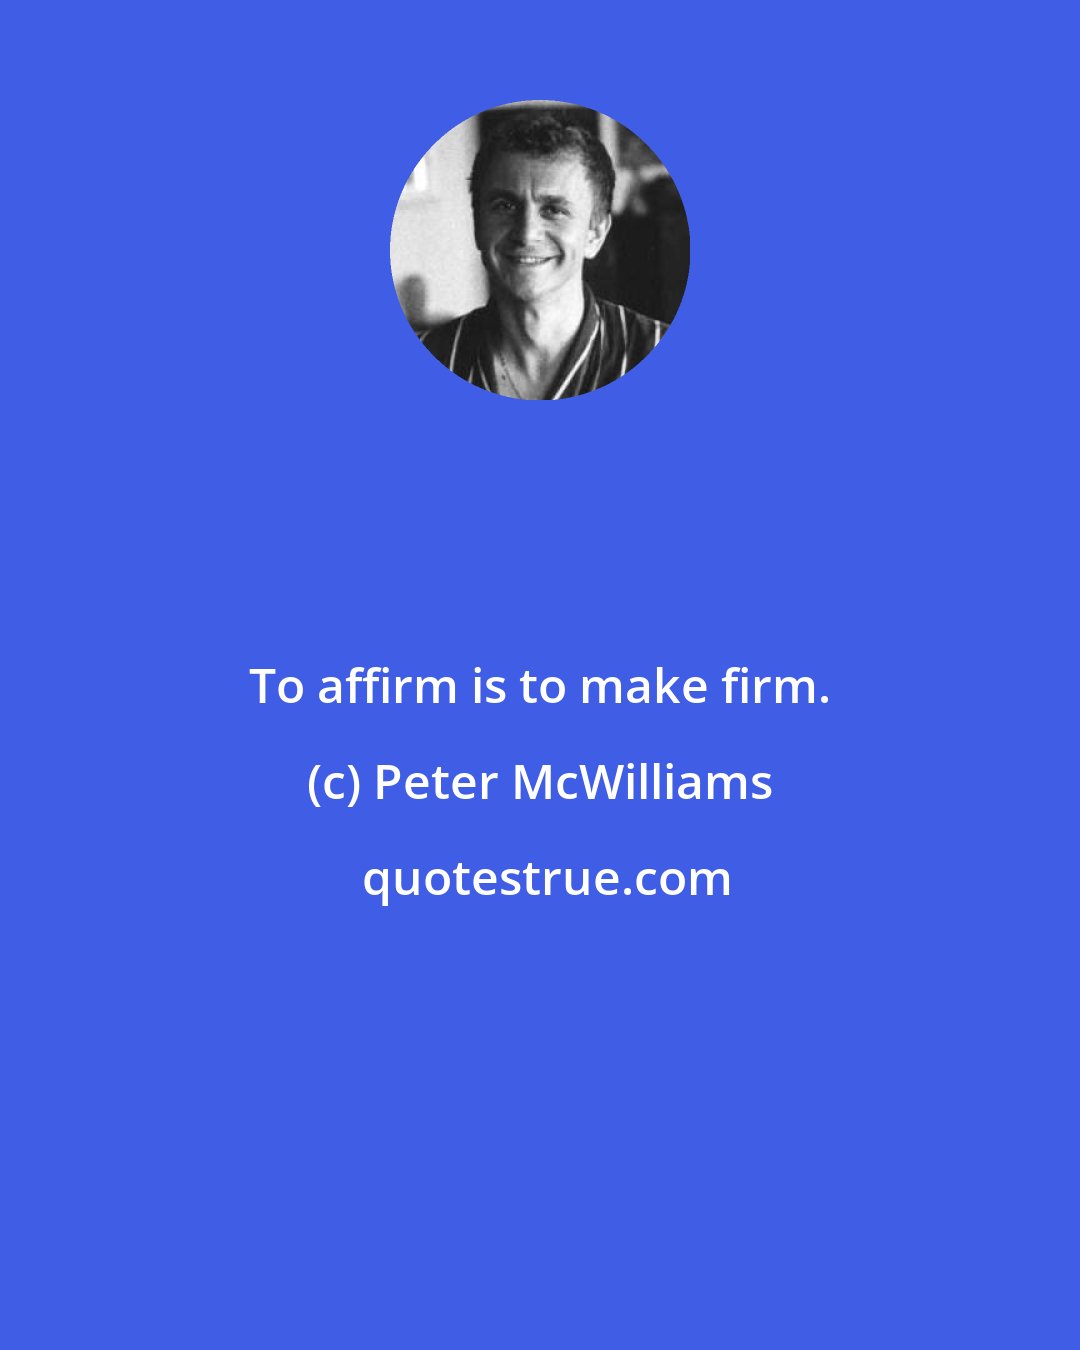 Peter McWilliams: To affirm is to make firm.